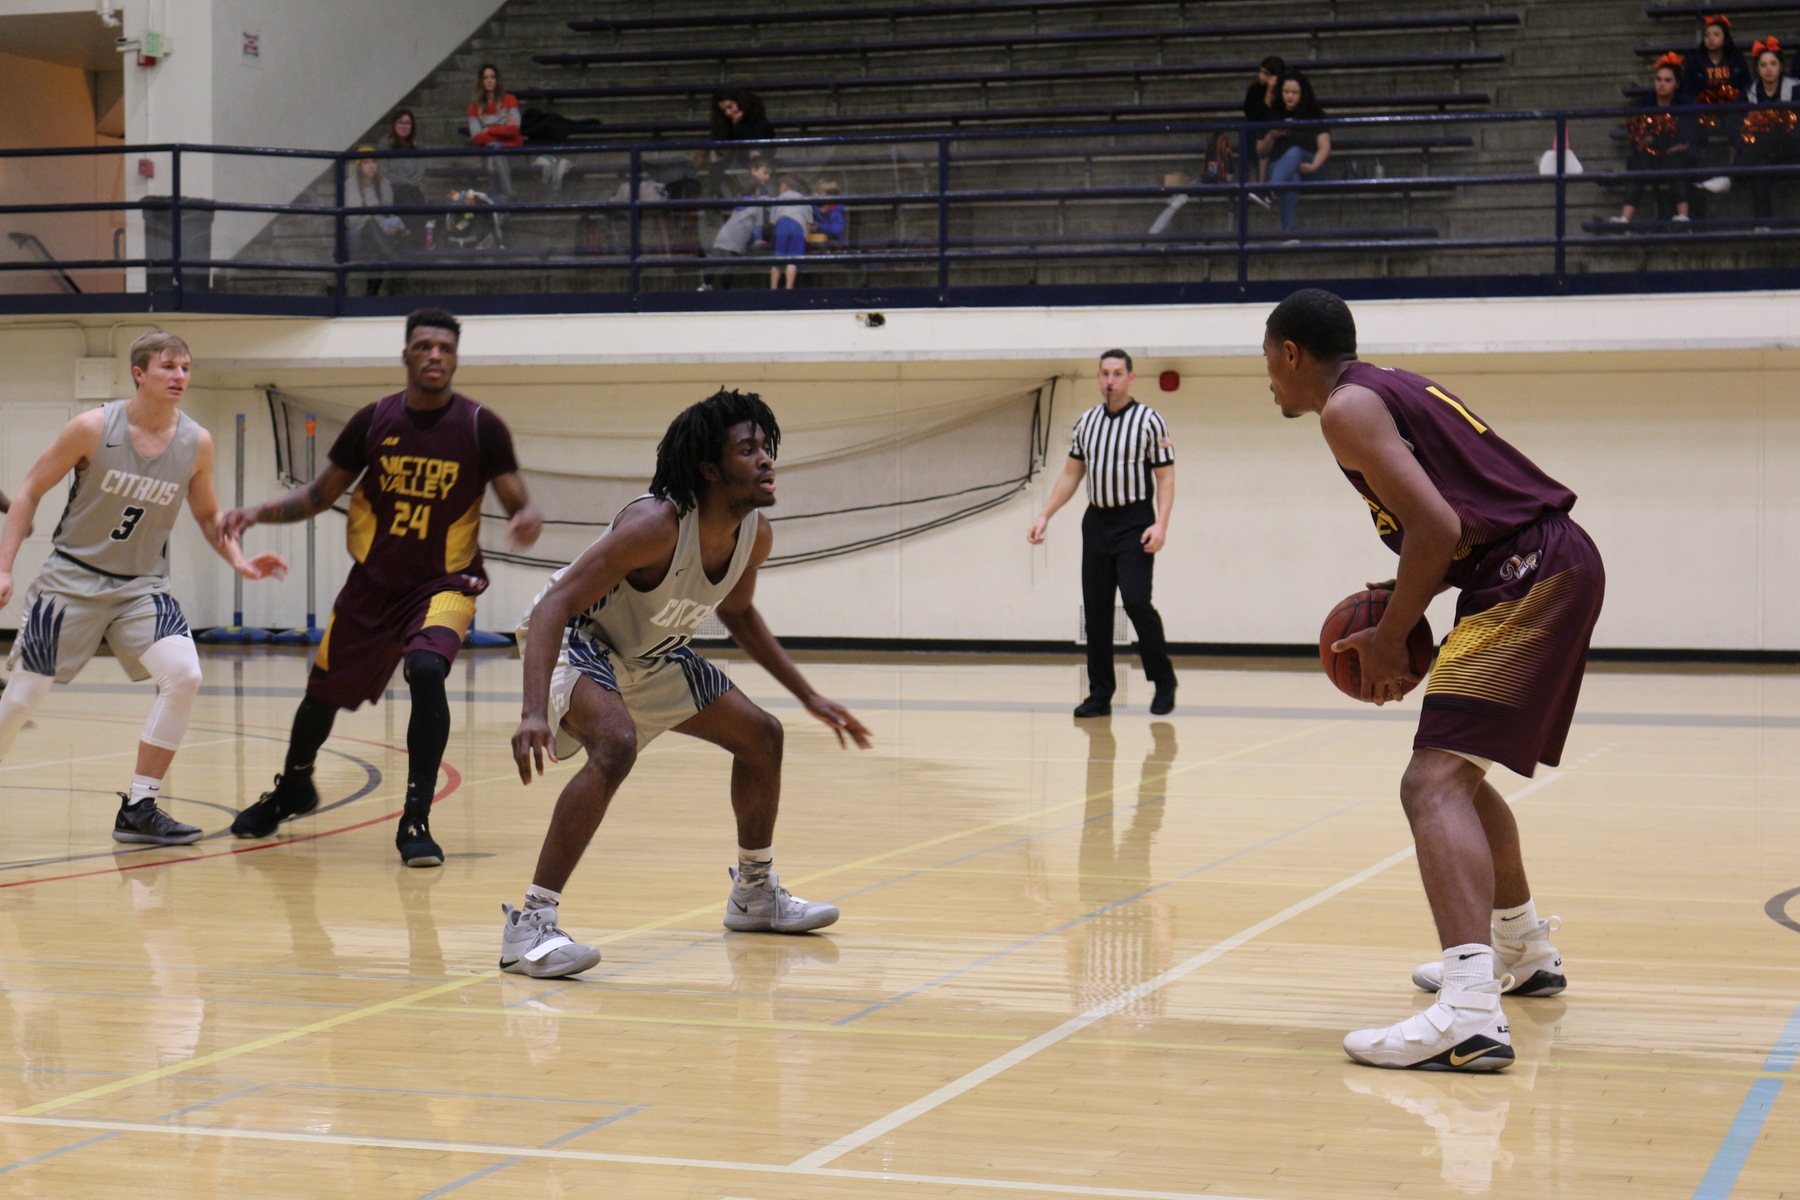 Treyvon Watts-Hale eyes up his opponent. Watts-Hale leads the Owls in steals this season with 36.